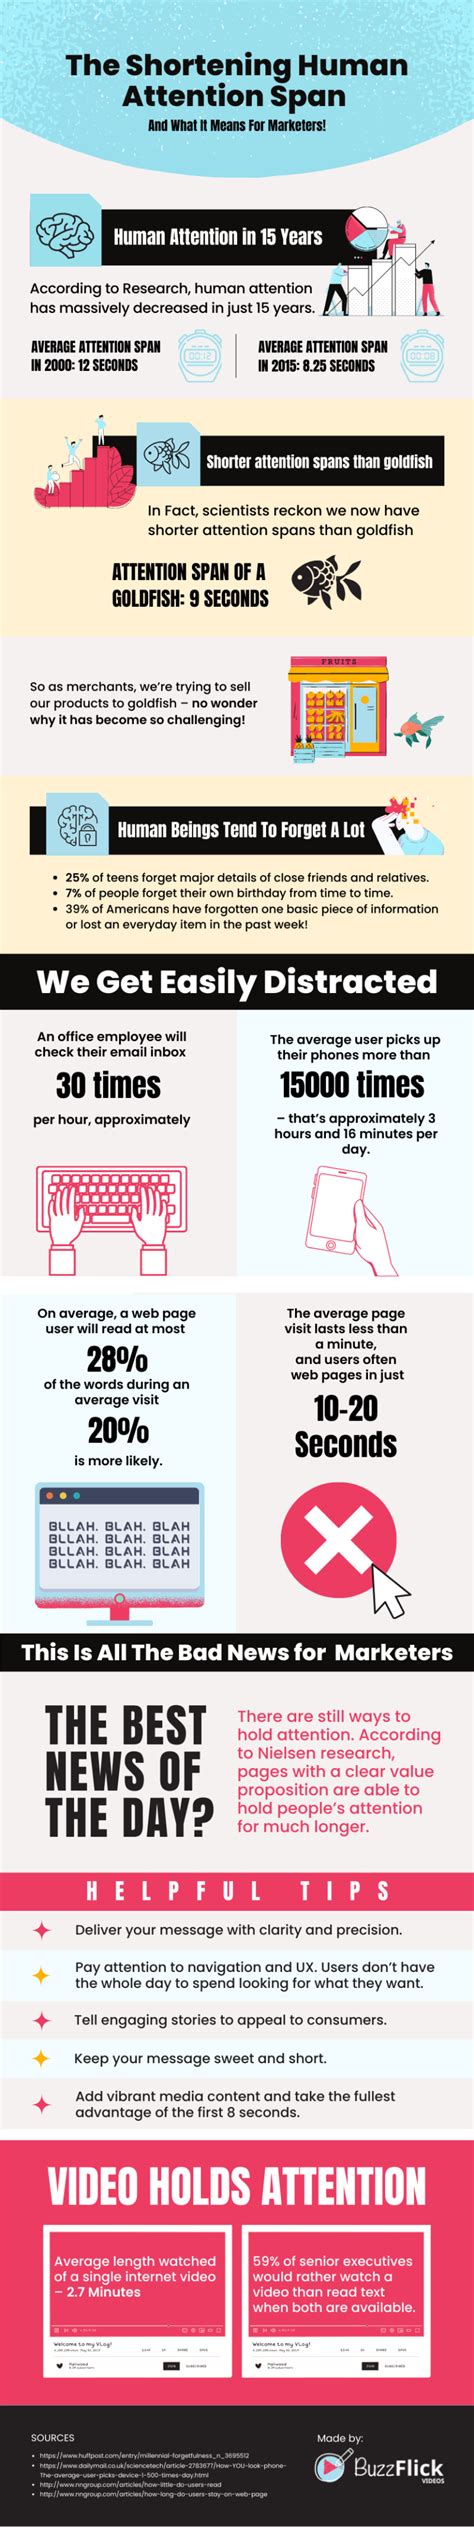 The Dwindling Human Attention Span Infographic